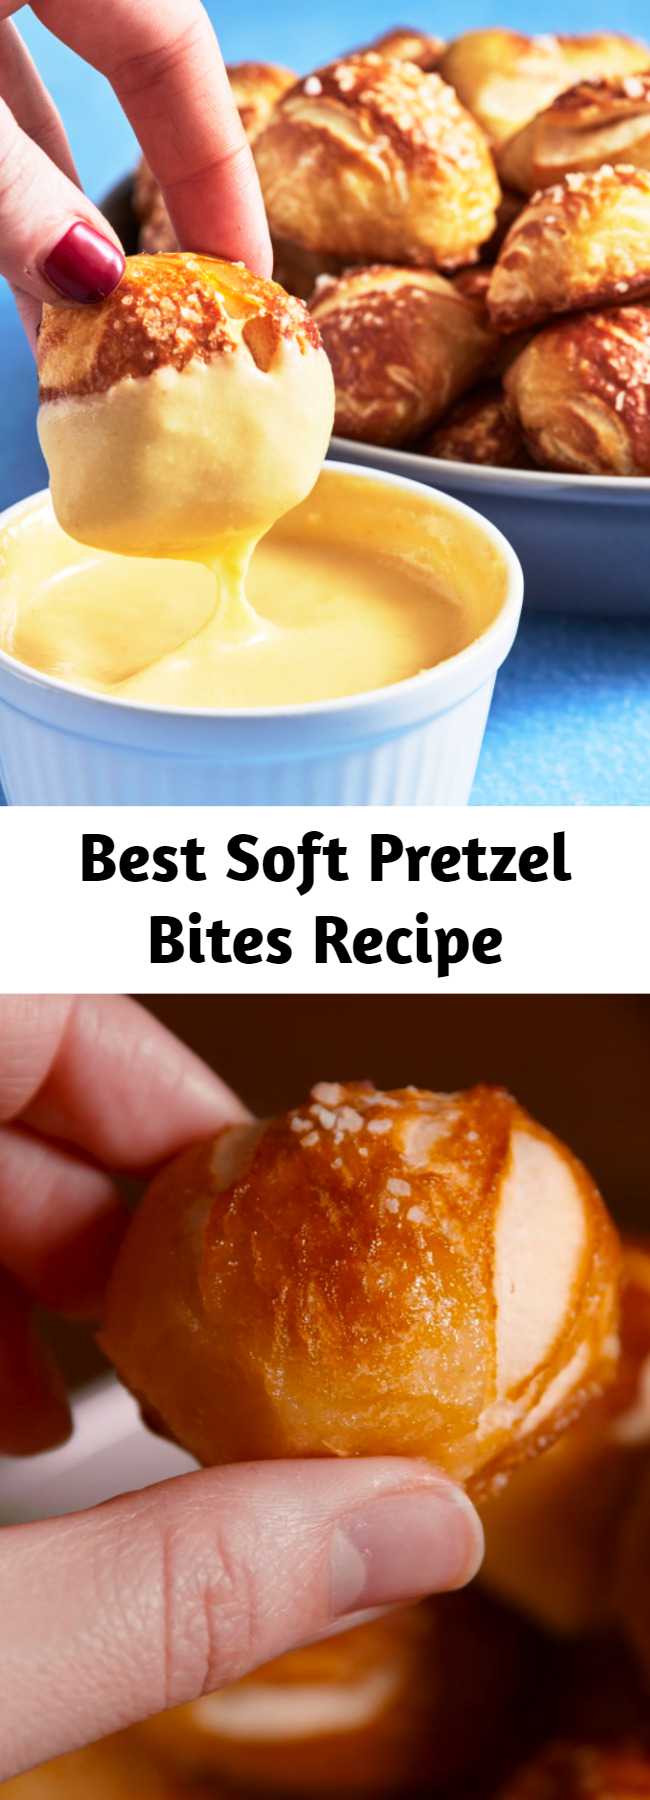 Best Soft Pretzel Bites Recipe - Using canned biscuits to make pretzel bites is the best hack ever. The pretzels won't look gorgeous as they come out of the boiling water, but don't worry—they will brown and crisp up and be oh-so-gorgeous when they come out of the oven! #easy #recipe #pretzels #bites #soft #softpretzel #auntieannes #bread